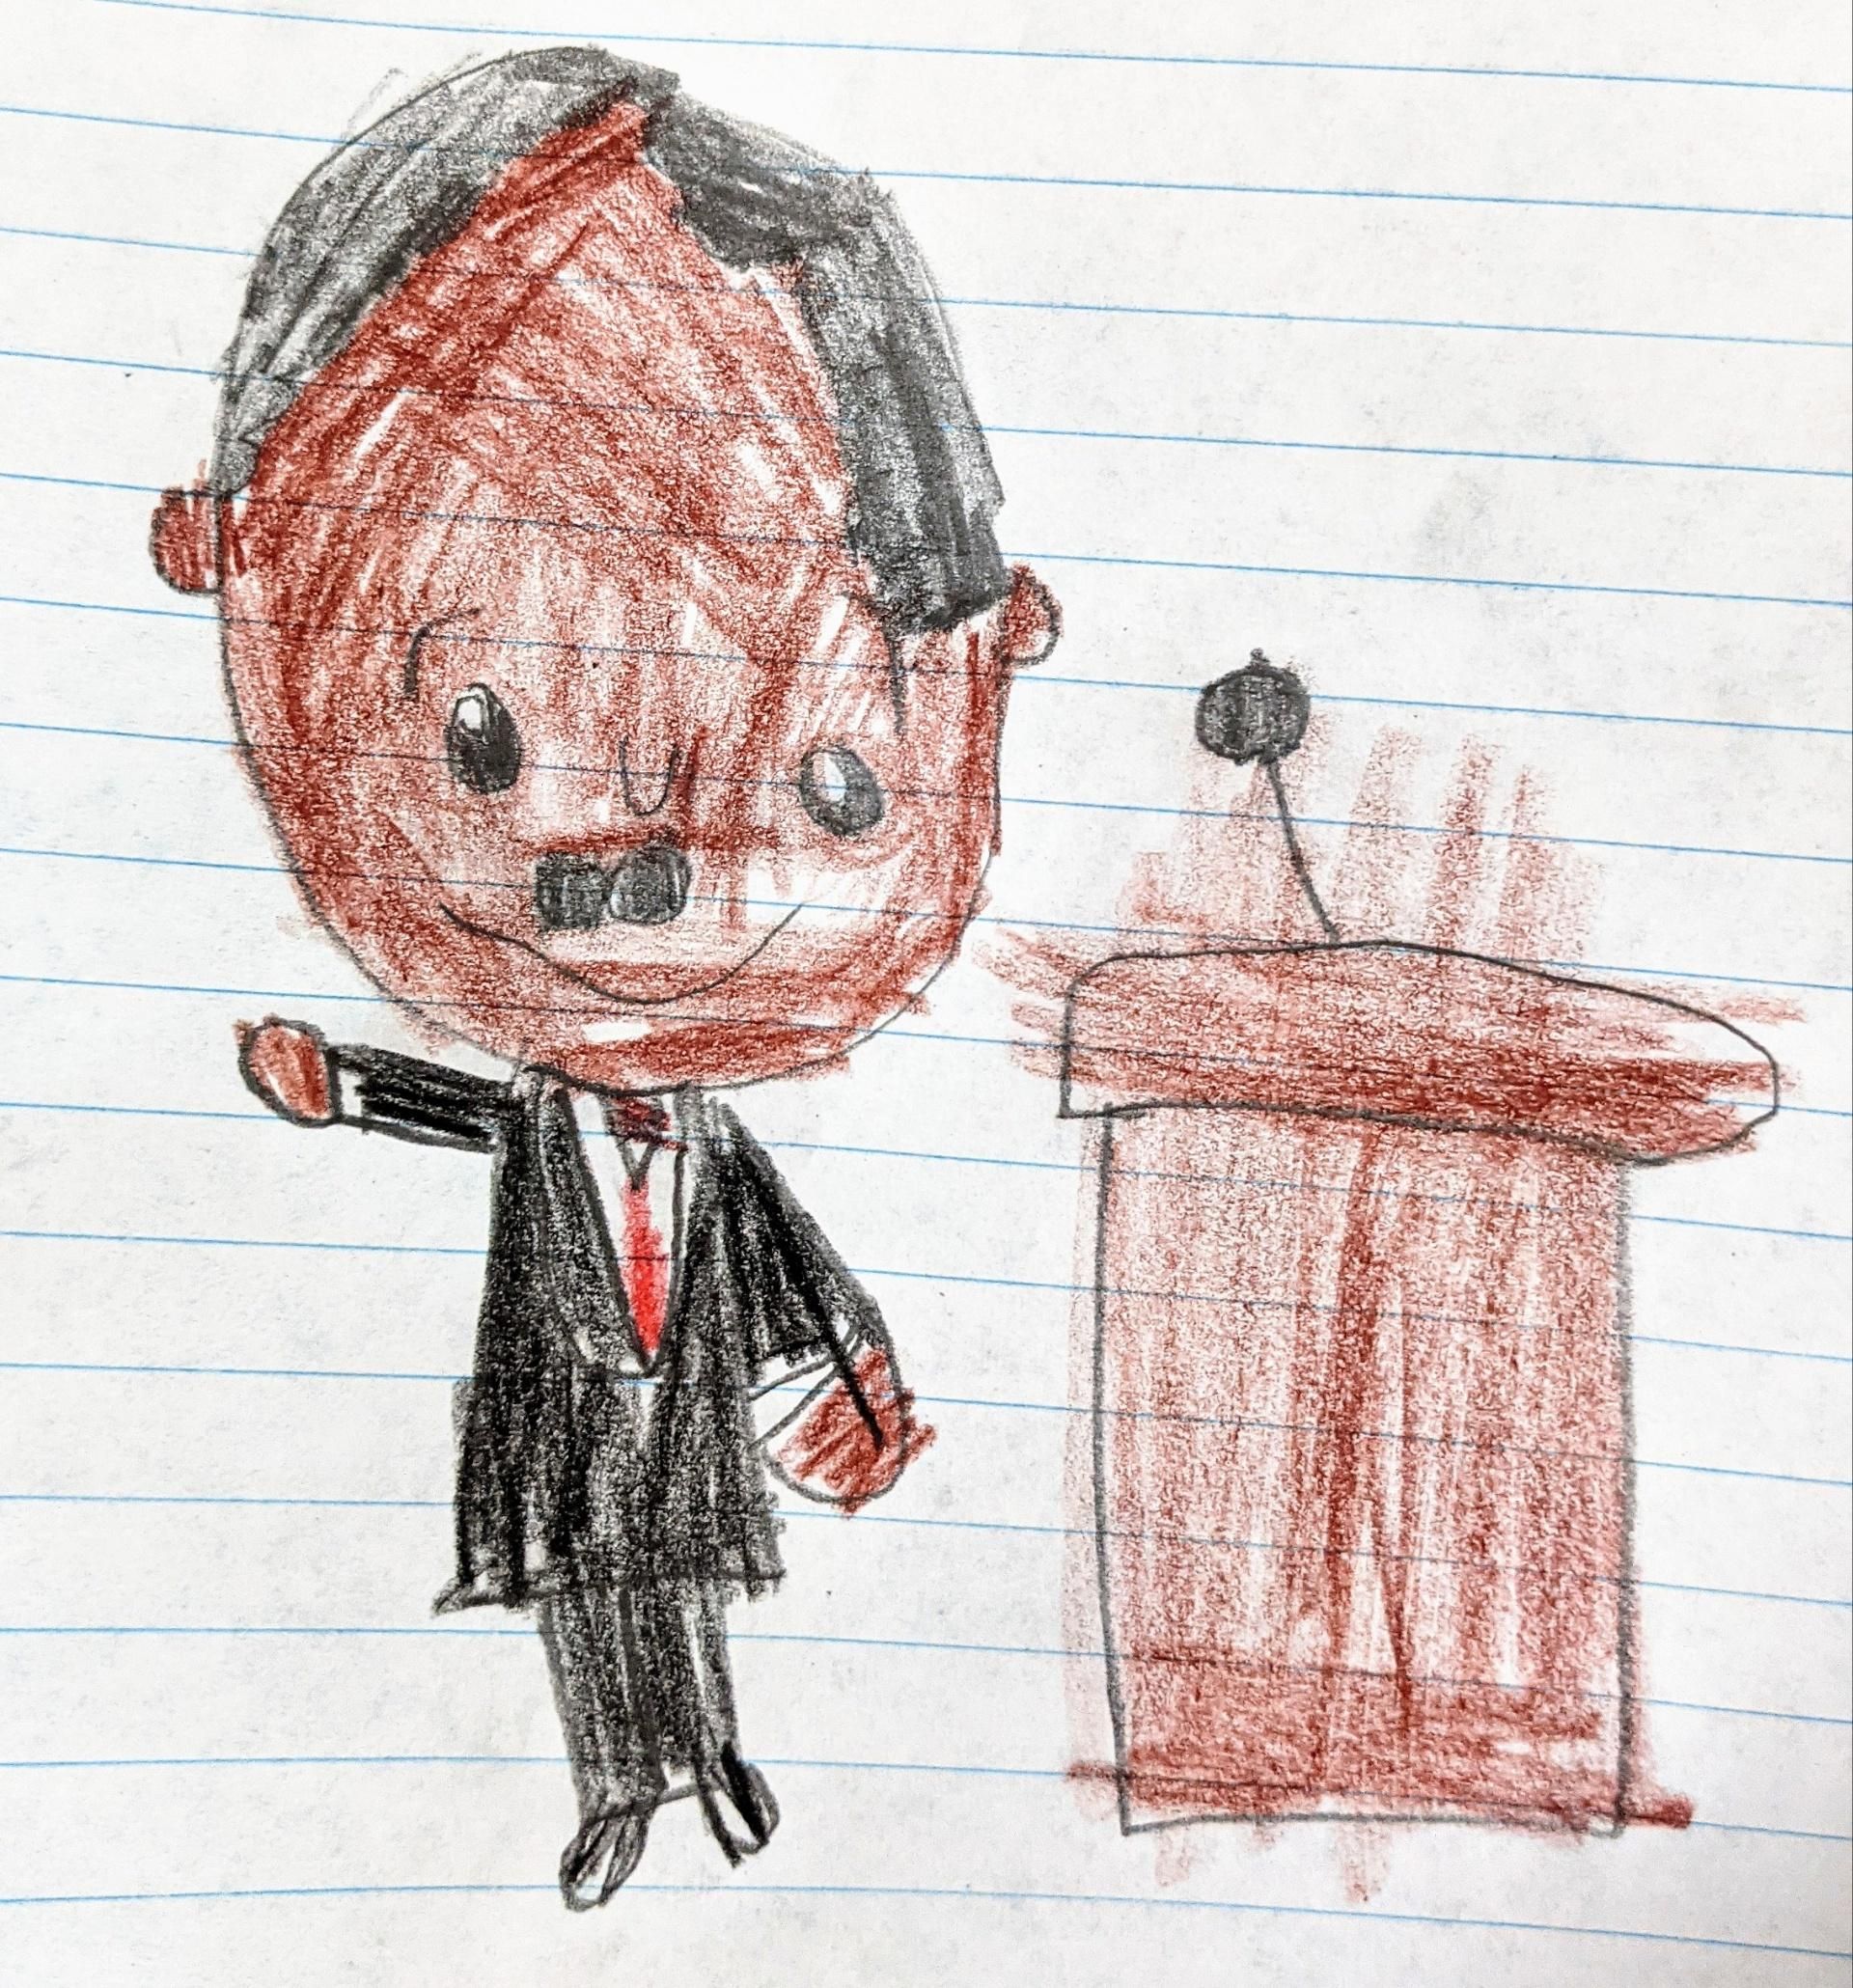 My son was supposed to draw Dr. Martin Luther King Jr., but with the mustache, the side part hair and outstretched arm he's looking like someone else.